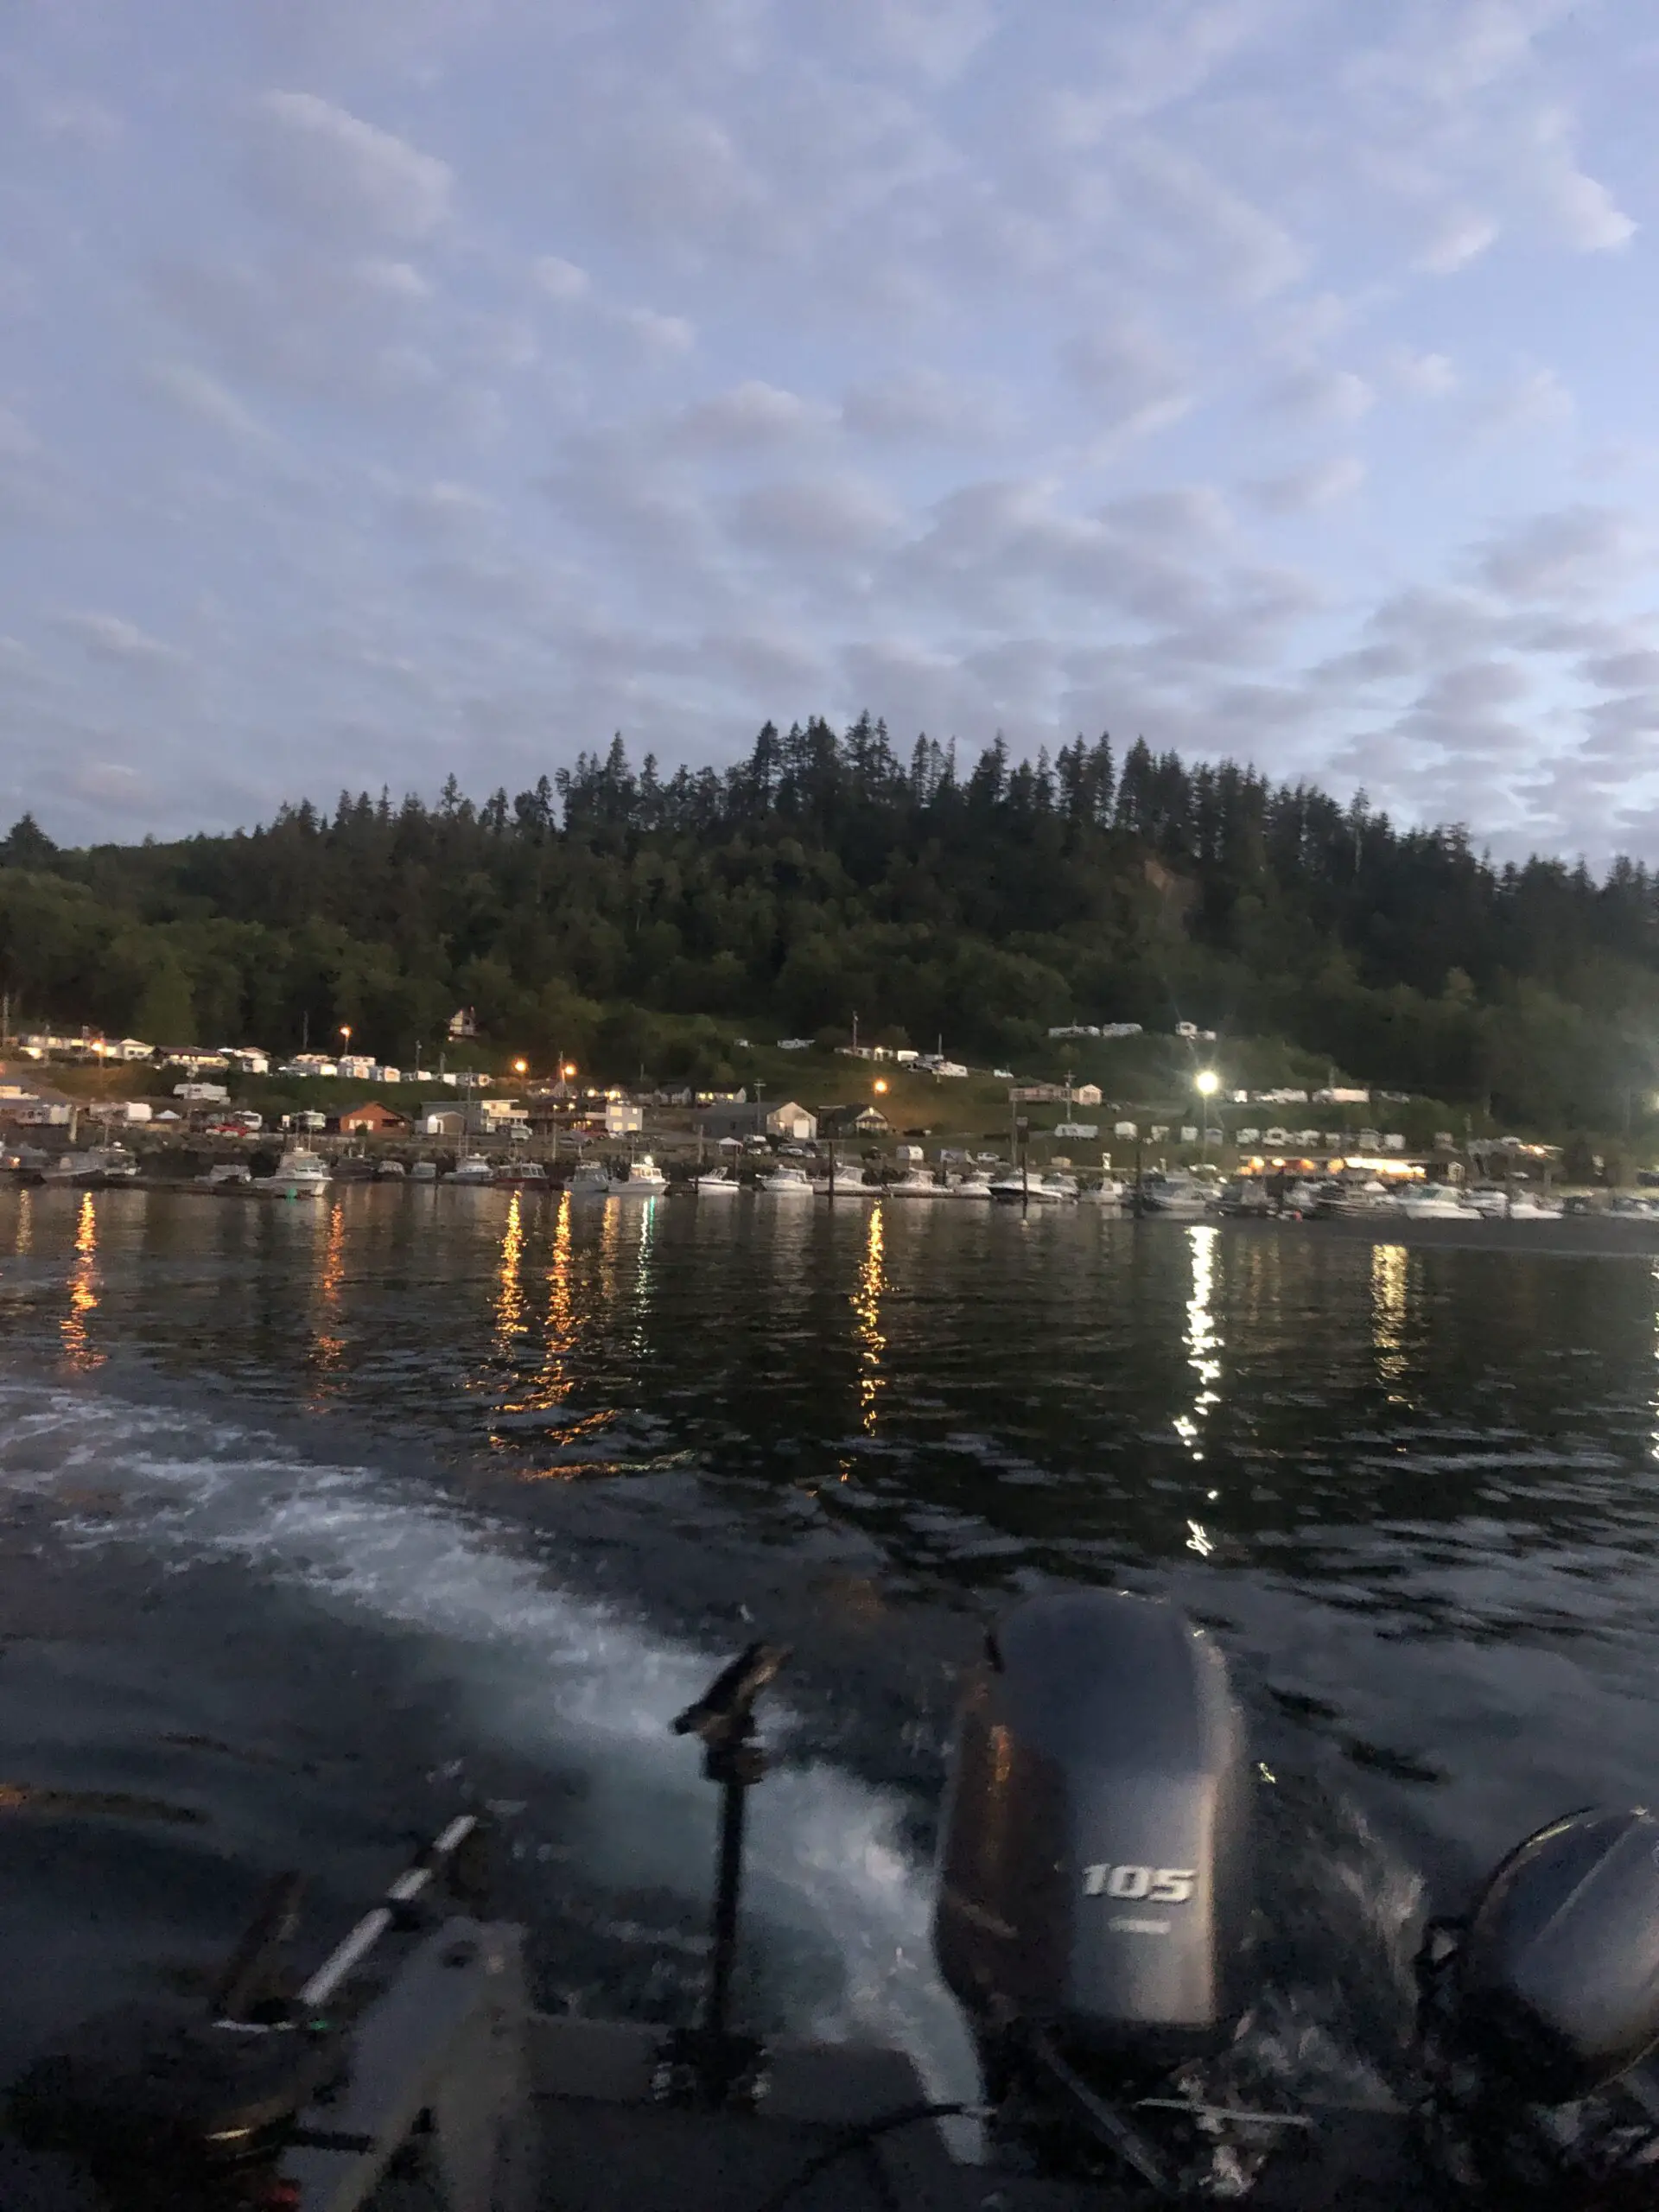 Morning view of leaving Clallam Bay